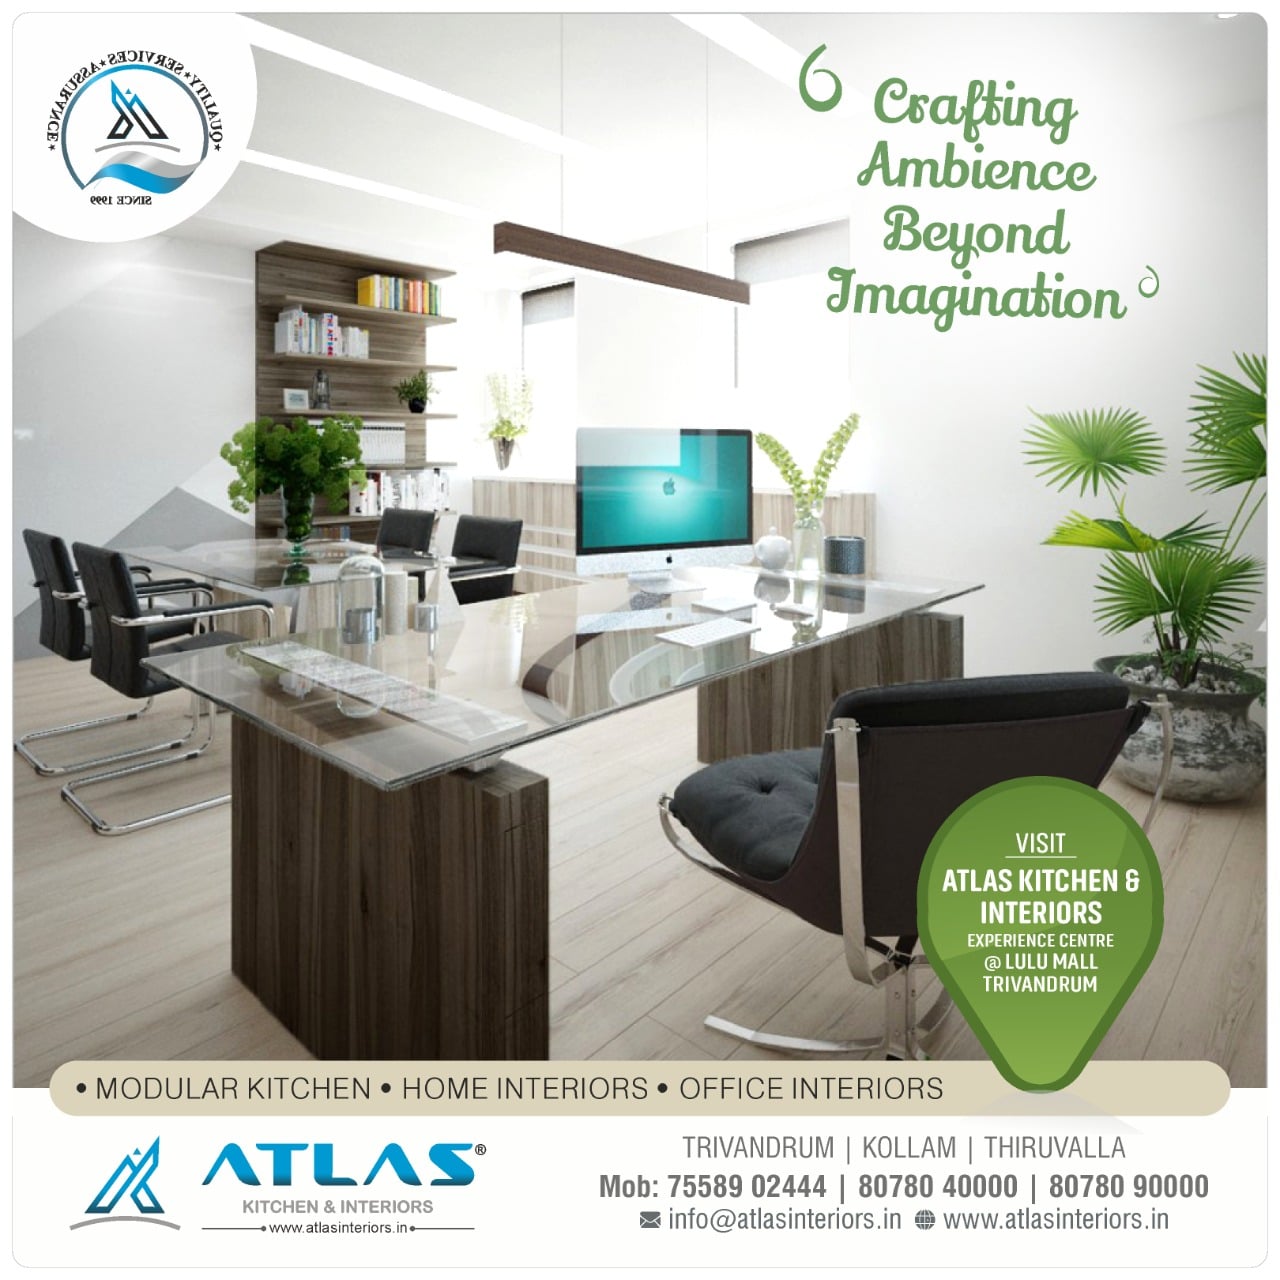 Atlas Offers You The Finest Interiors With Aesthetic Designs.